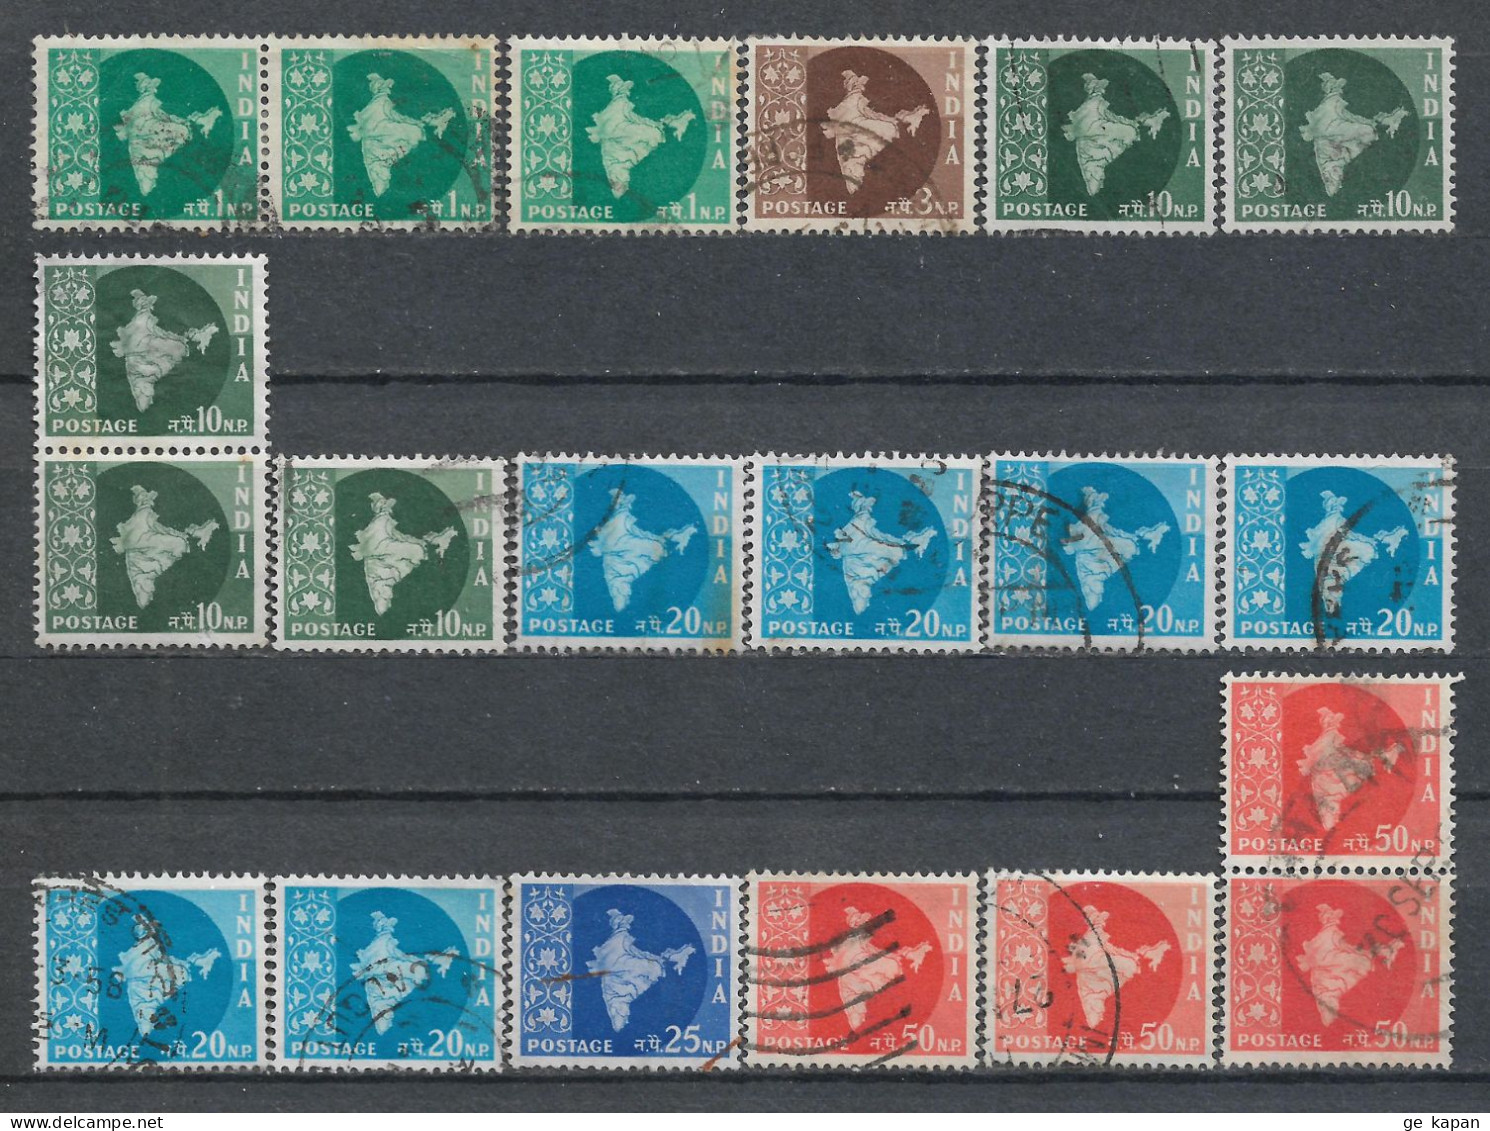 1957 INDIA SET OF 20 USED STAMPS (Michel # 259,261,265,268-270) CV €4.00 - Usados